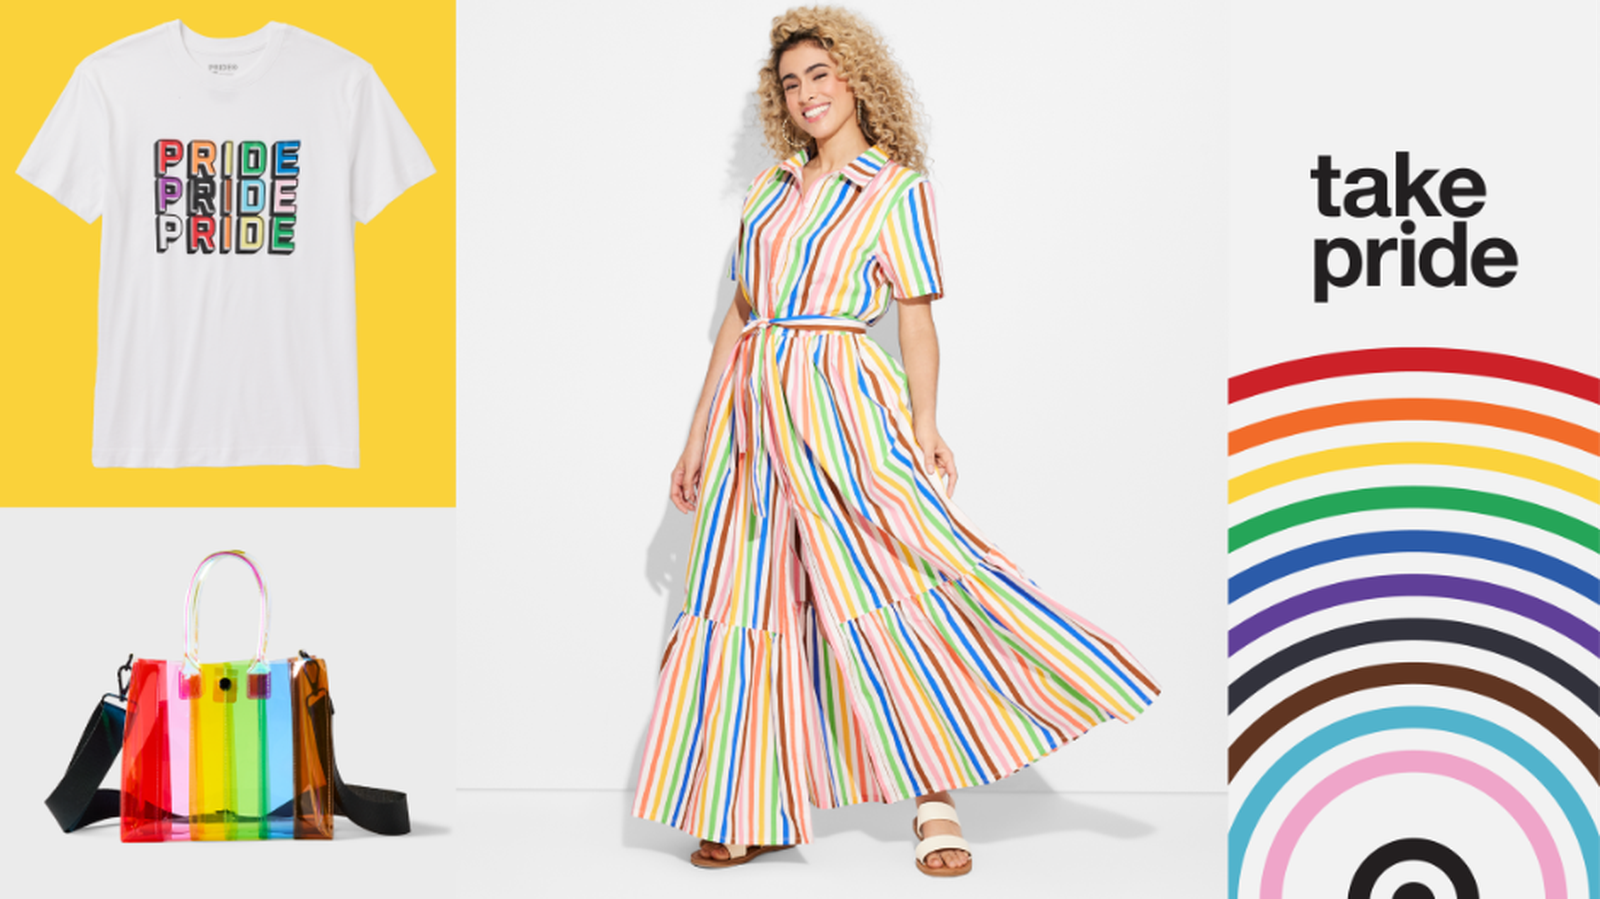 Target limiting Pride merchandise in stores after backlash – 960 The Ref